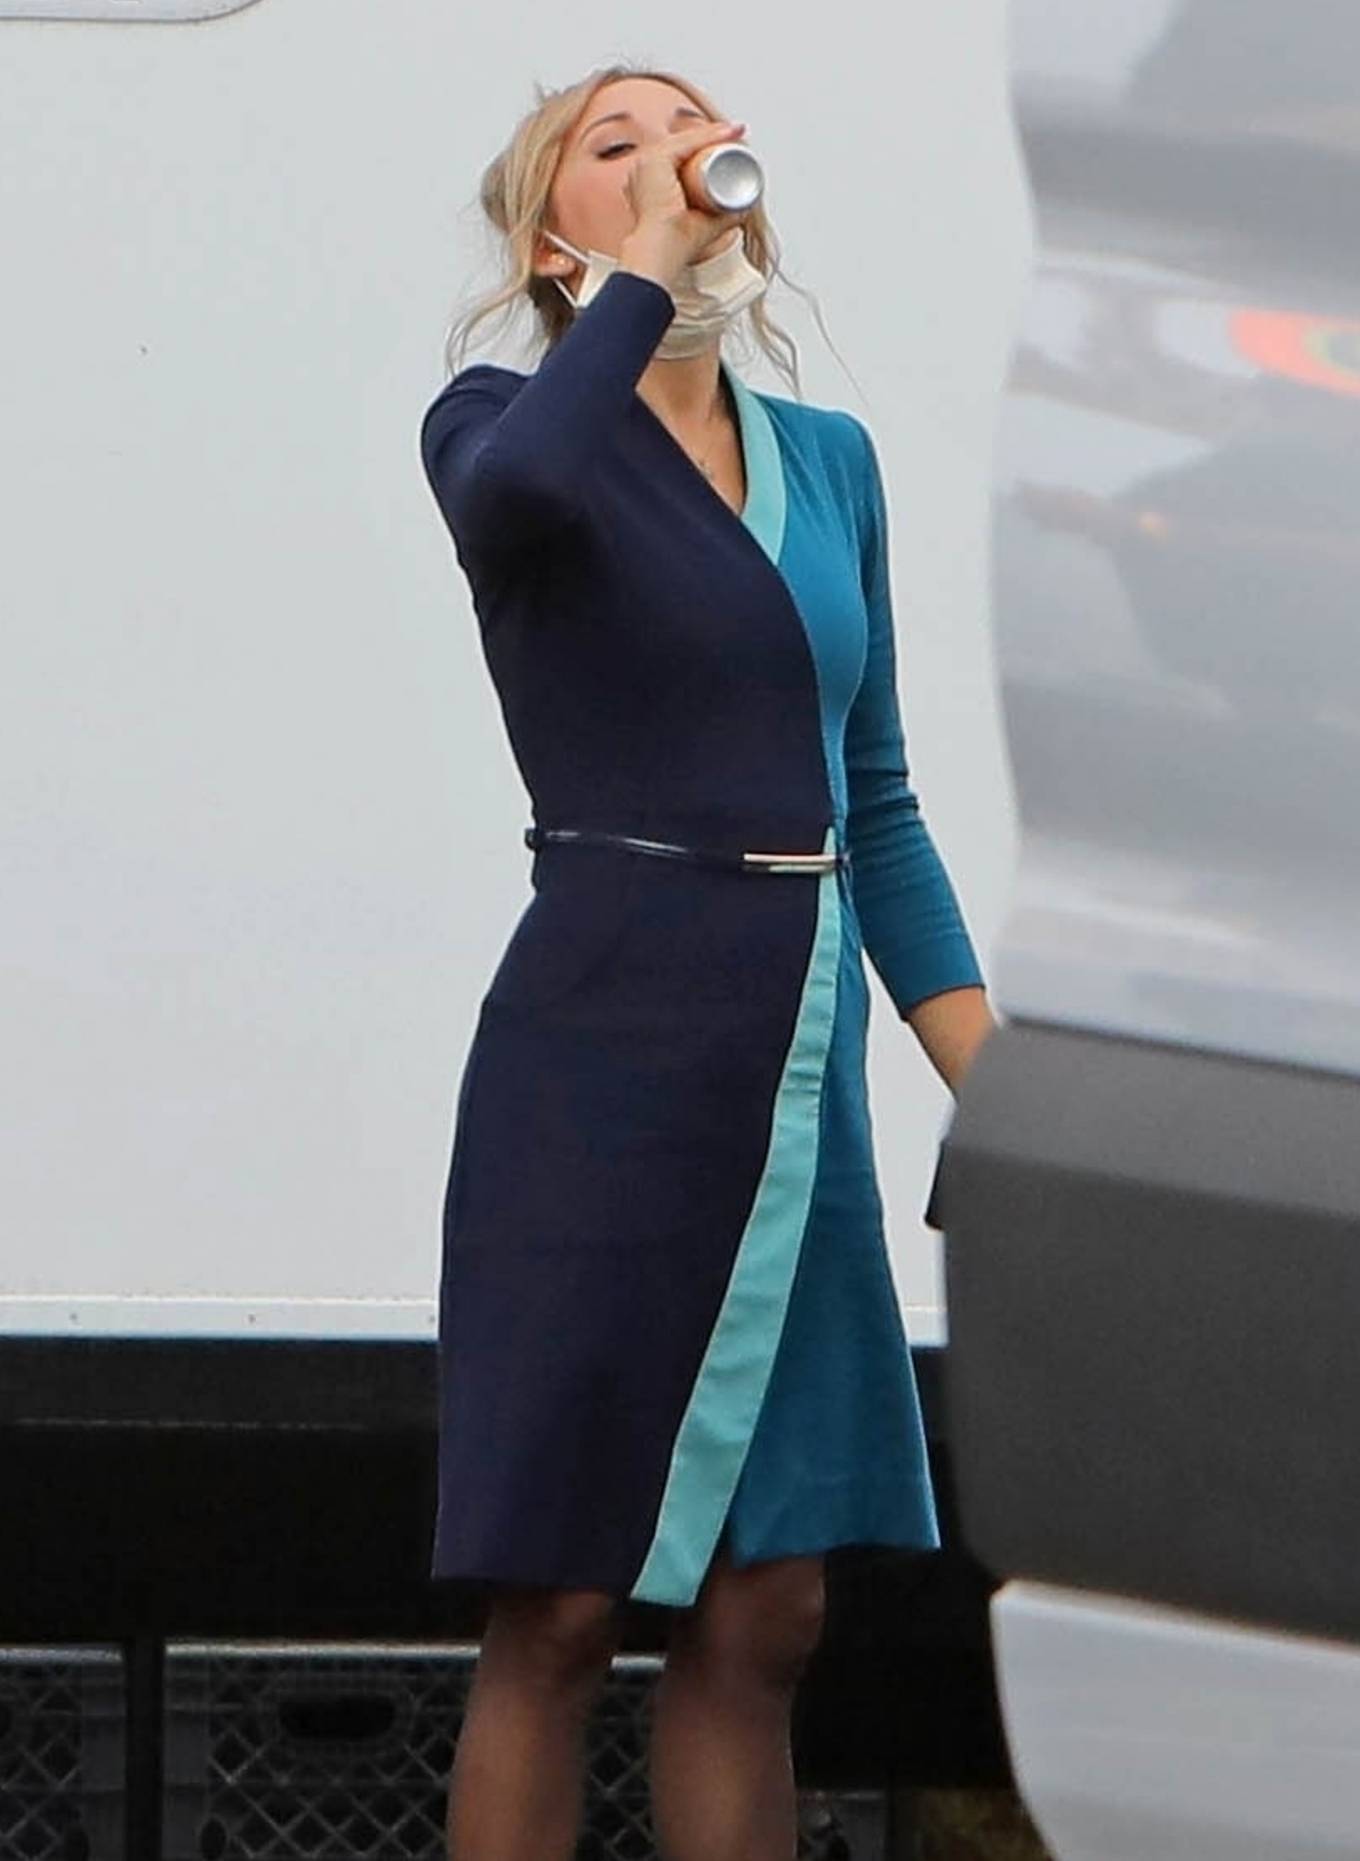 Kaley Cuoco 2021 : Kaley Cuoco – On a break from shooting scenes on the set of The Flight Attendant in Los Angeles-12